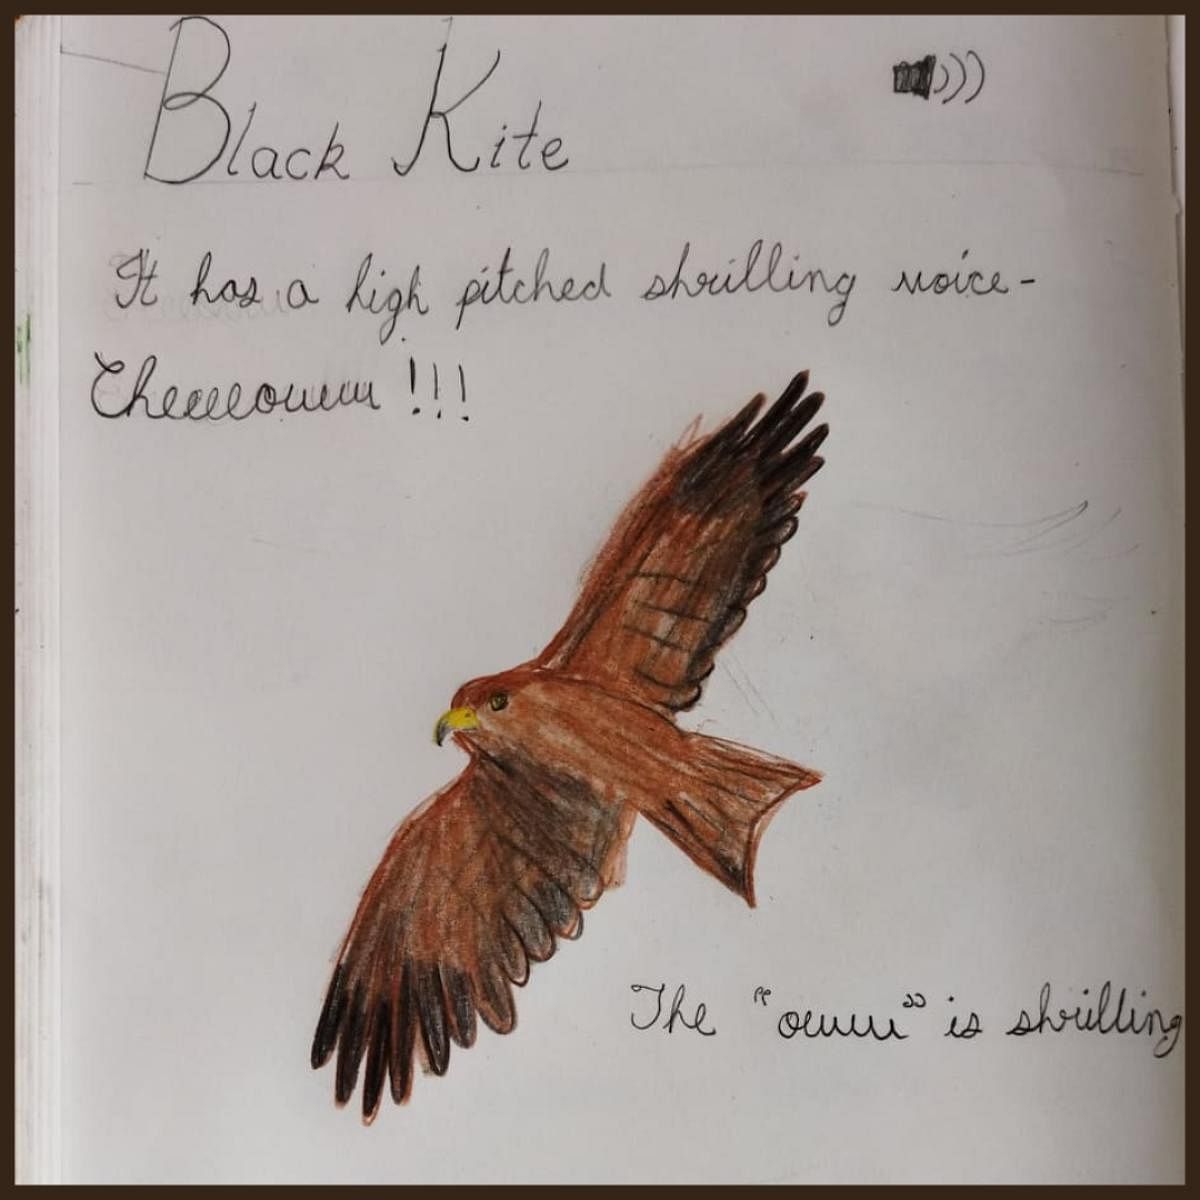 Artworks made by kids during previous workshops. Early Bird, an eight-year-old programme, aims to bring children closer to nature through birds.